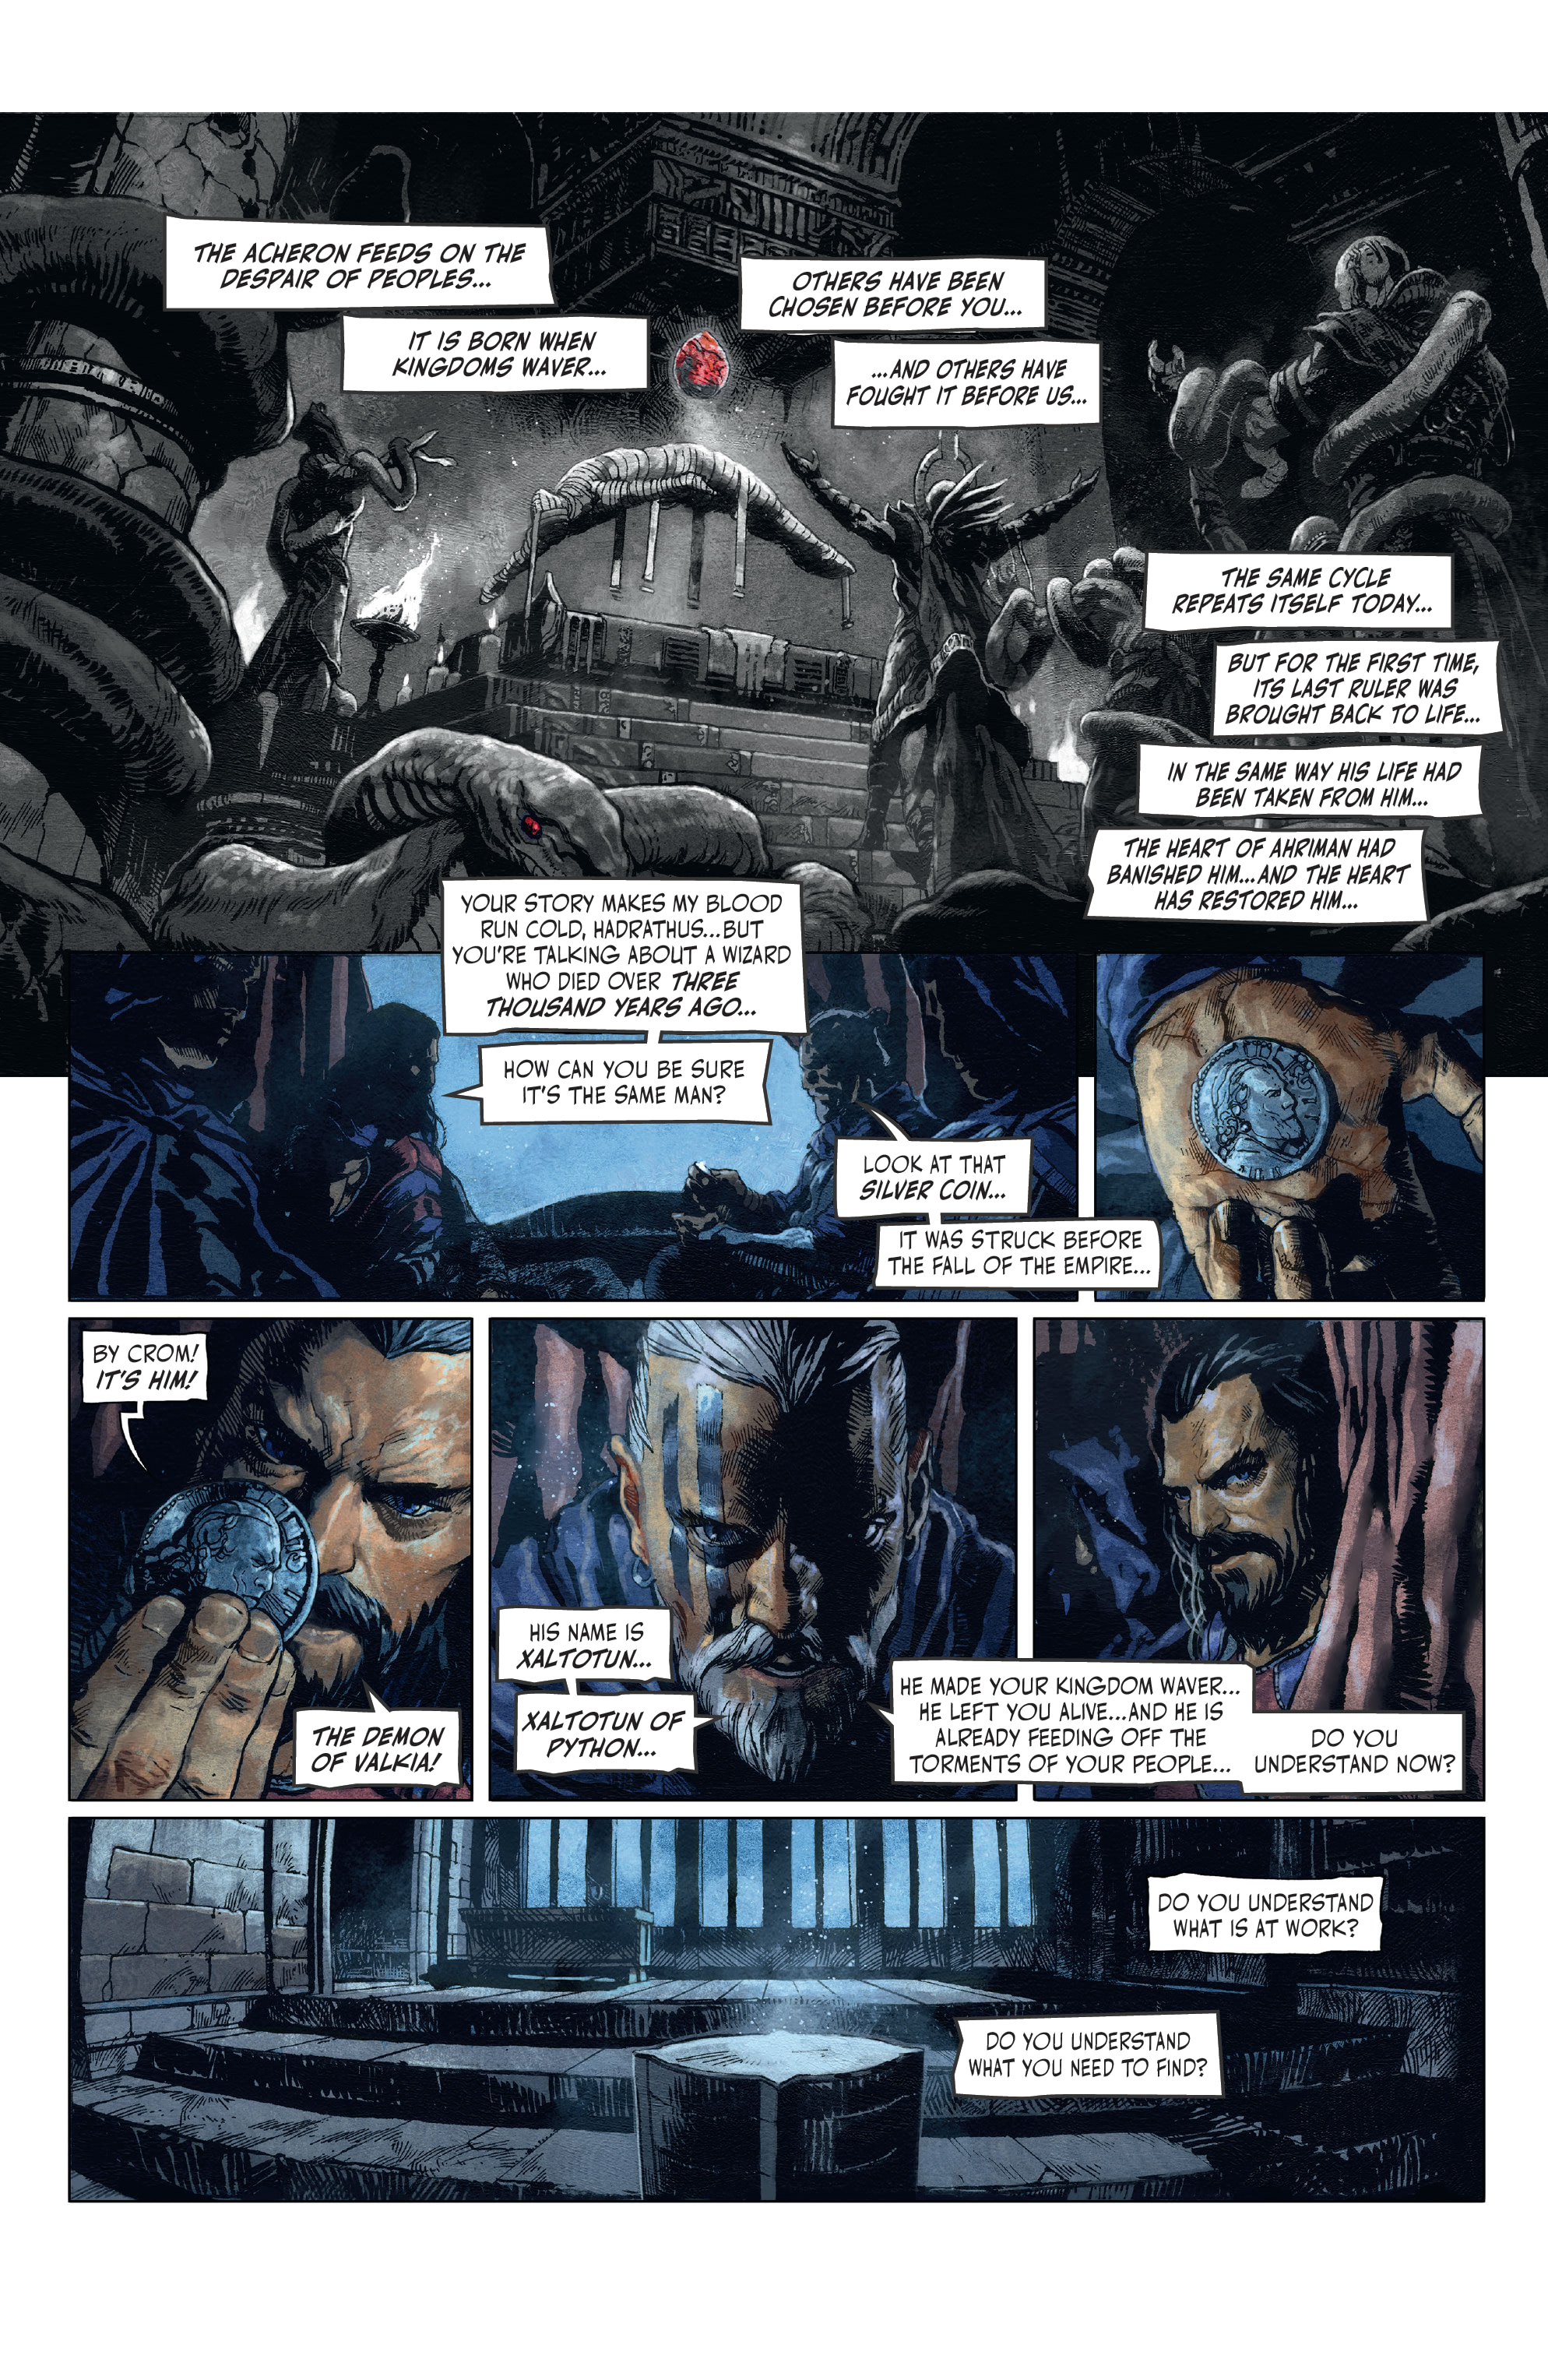 The Cimmerian: Hour of the Dragon (2022-): Chapter 3 - Page 5